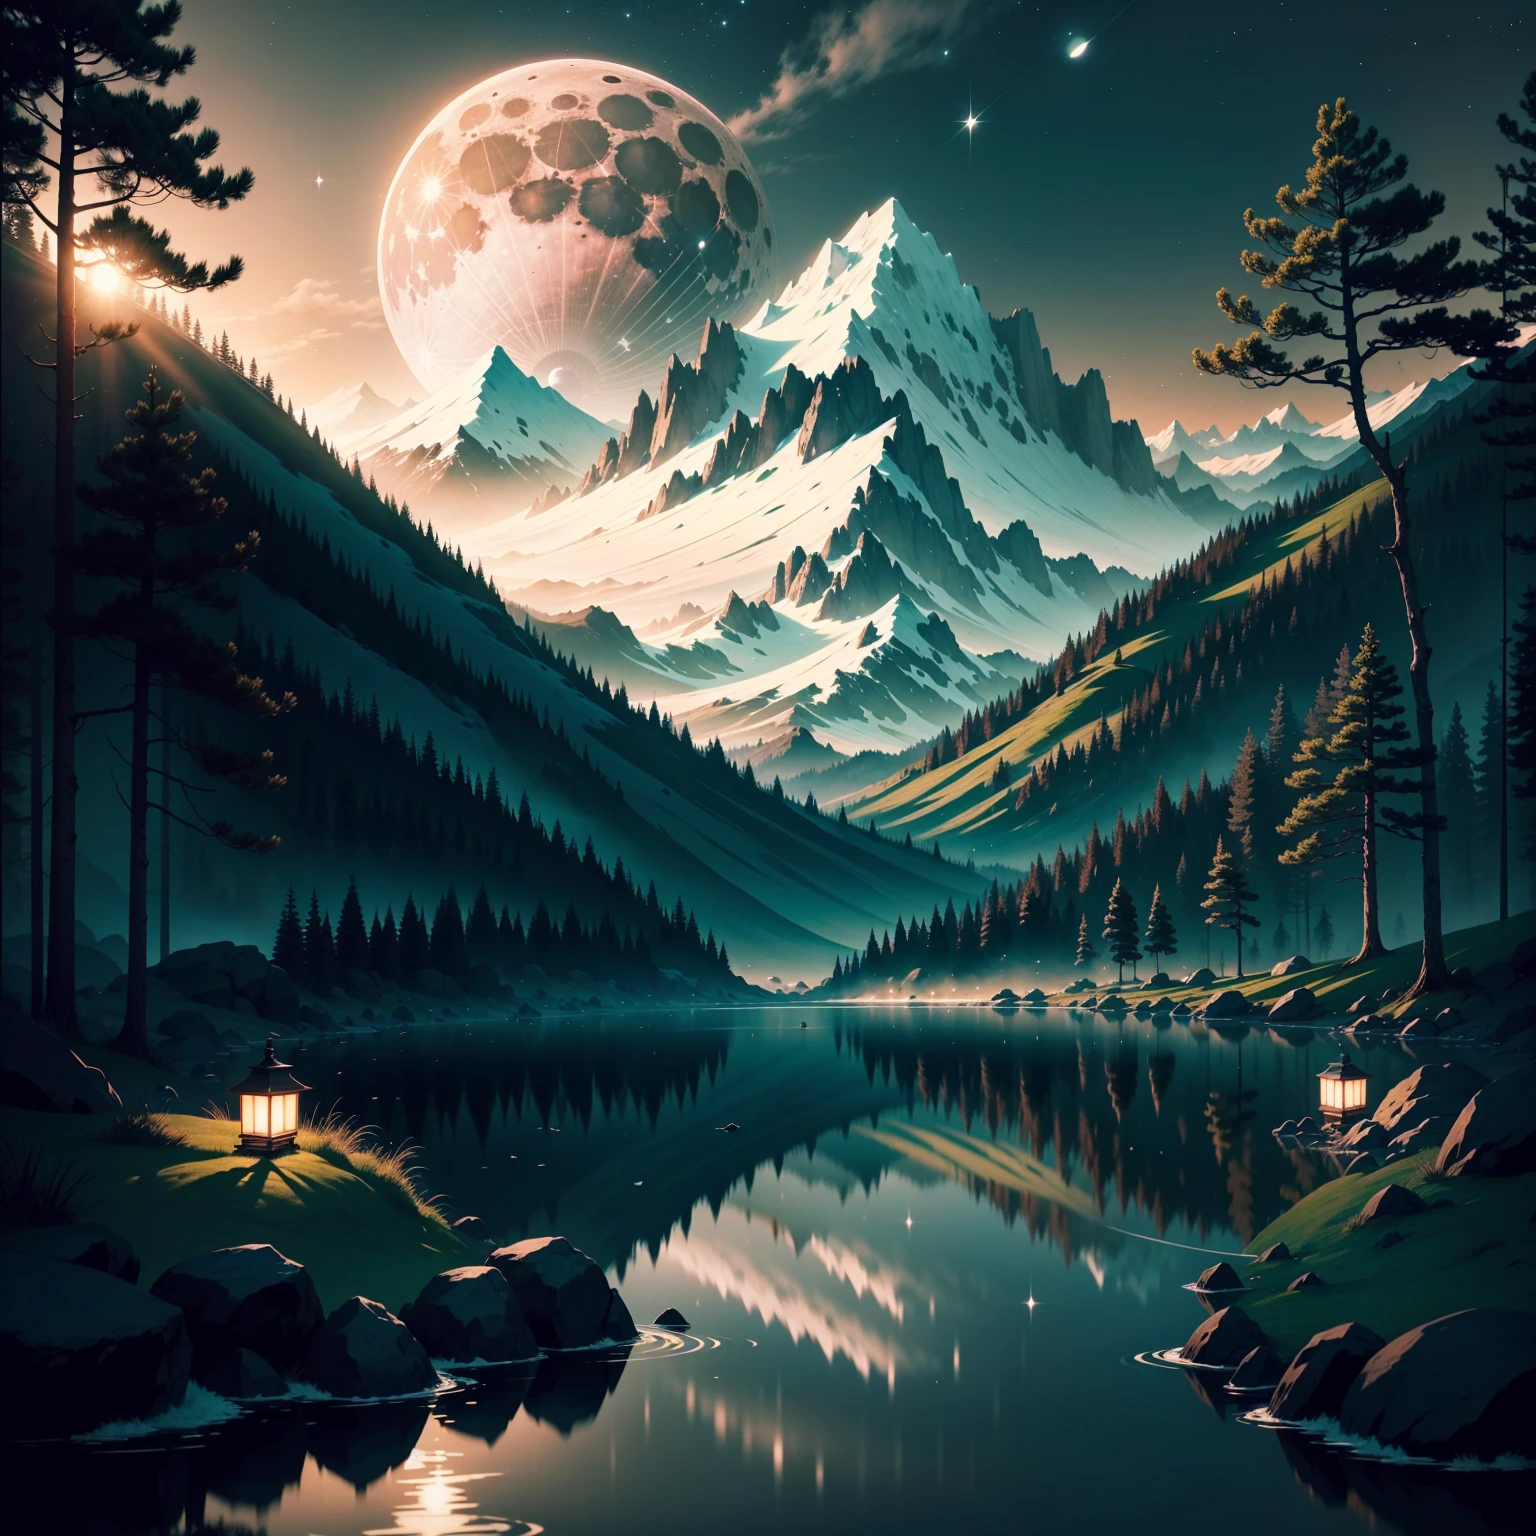 Here is a description of the scene in the style of a Japanese adventure animation:

The screen opens up to a breathtaking landscape, with towering mountains in the background and a night sky dotted with twinkling stars. The environment is wrapped in a magical and serene atmosphere, while a gentle breeze swings the grass and trees.
In the background we see a hill, the horizon illuminated by the full and radiant moon. The moon emits an intense silver glow, bathing the landscape in a soft, mysterious light. The reflection of the moon is reflected in the character's eyes, bringing an air of wonder and desire for discovery.

The wind subtly blows the trees,
giving movement and dynamism to the scene.

The whole scene is animated with vibrant colors and subtle contrasts, highlighting the beauty of the scenery and the aura of mystery of the moon. A trilha sonora suave, com instrumentos tradicionais japoneses, ecoa no fundo, increasing the sense of impending adventure.
This Japanese animated scene captures the excitement and grandeur of an epic journey, enquanto o personagem principal encara o horizonte iluminado pela lua, Ready to embark on an incredible adventure full of challenges and discoveries.